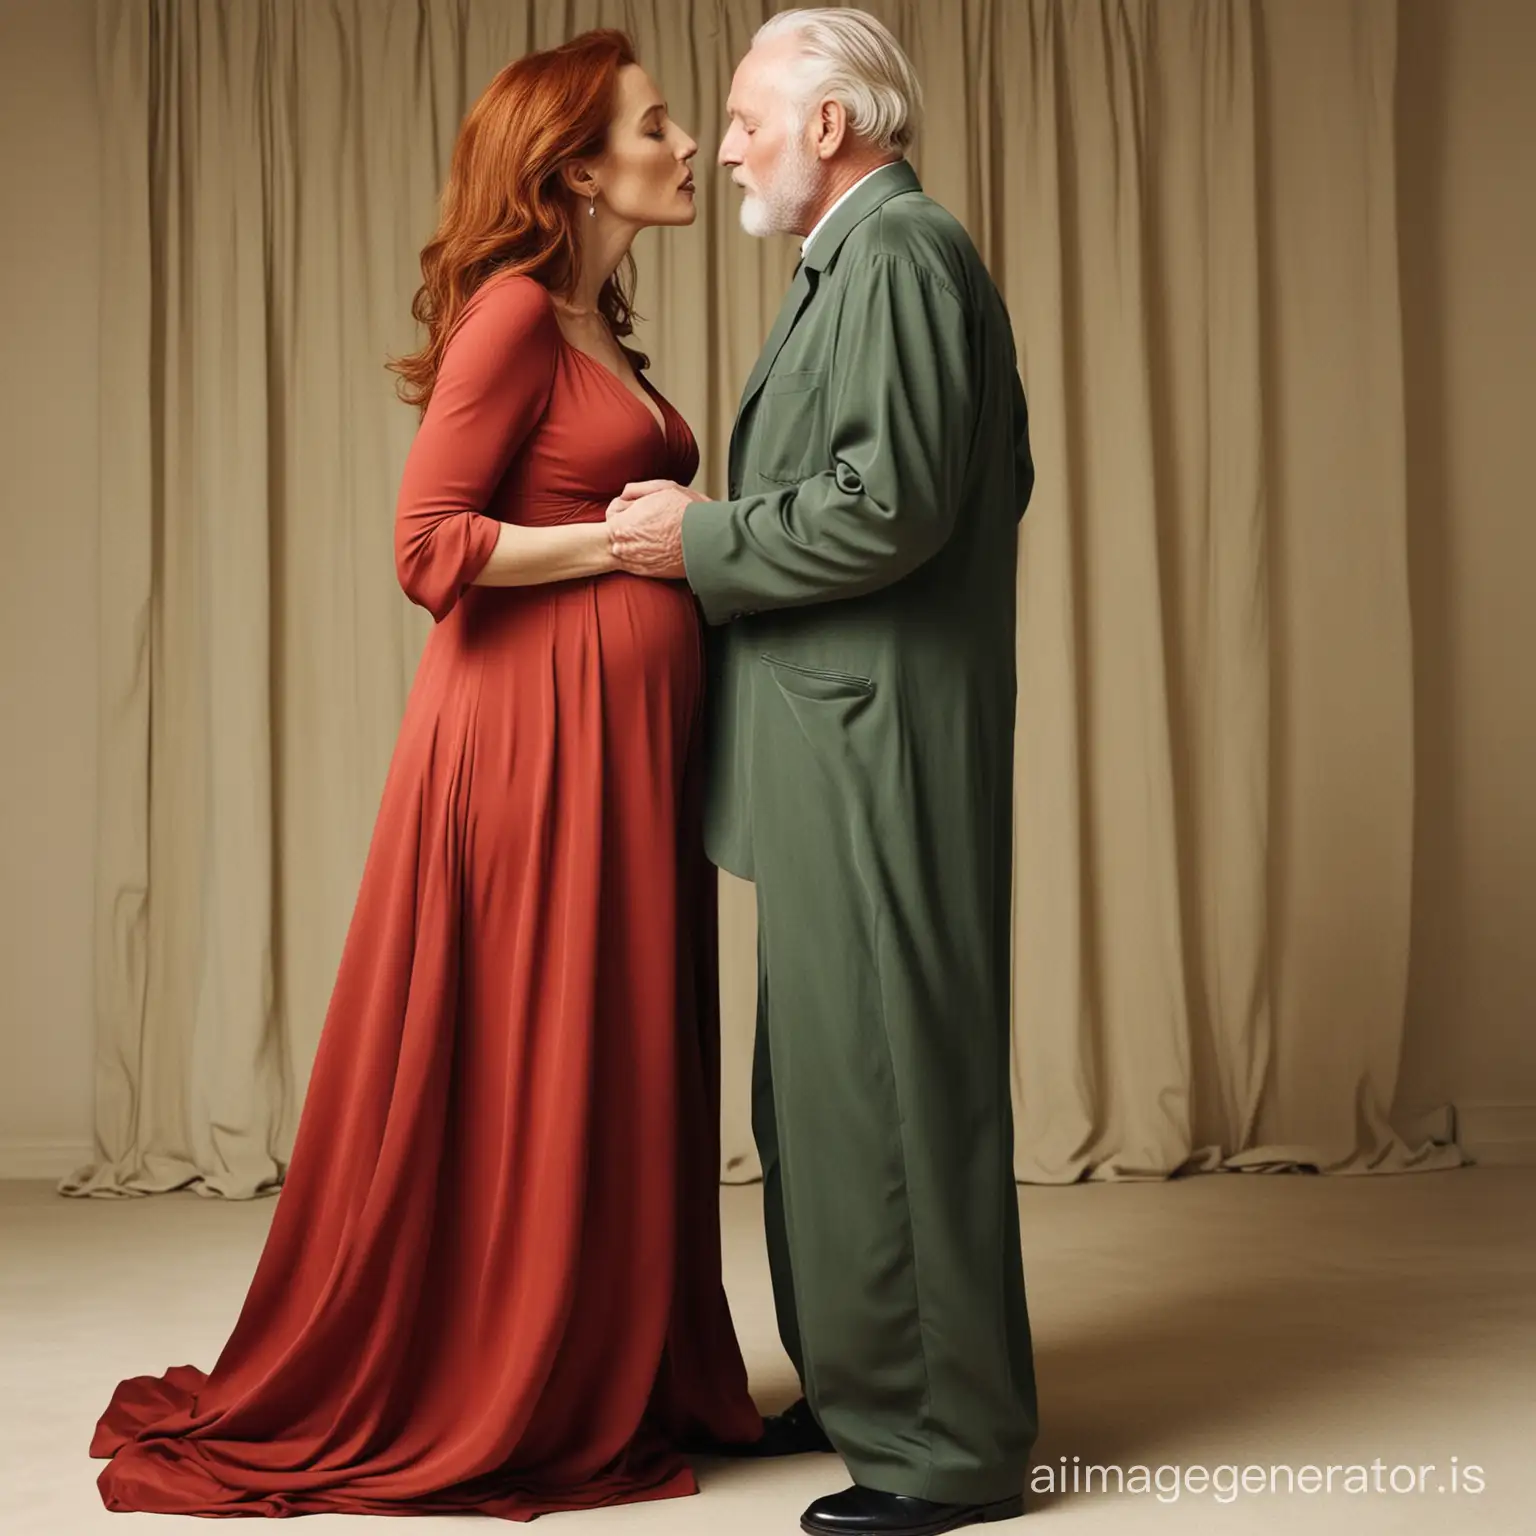 Romantic-RedHaired-Gillian-Anderson-Embraces-New-Husband-in-Billowing-Maternity-Gown